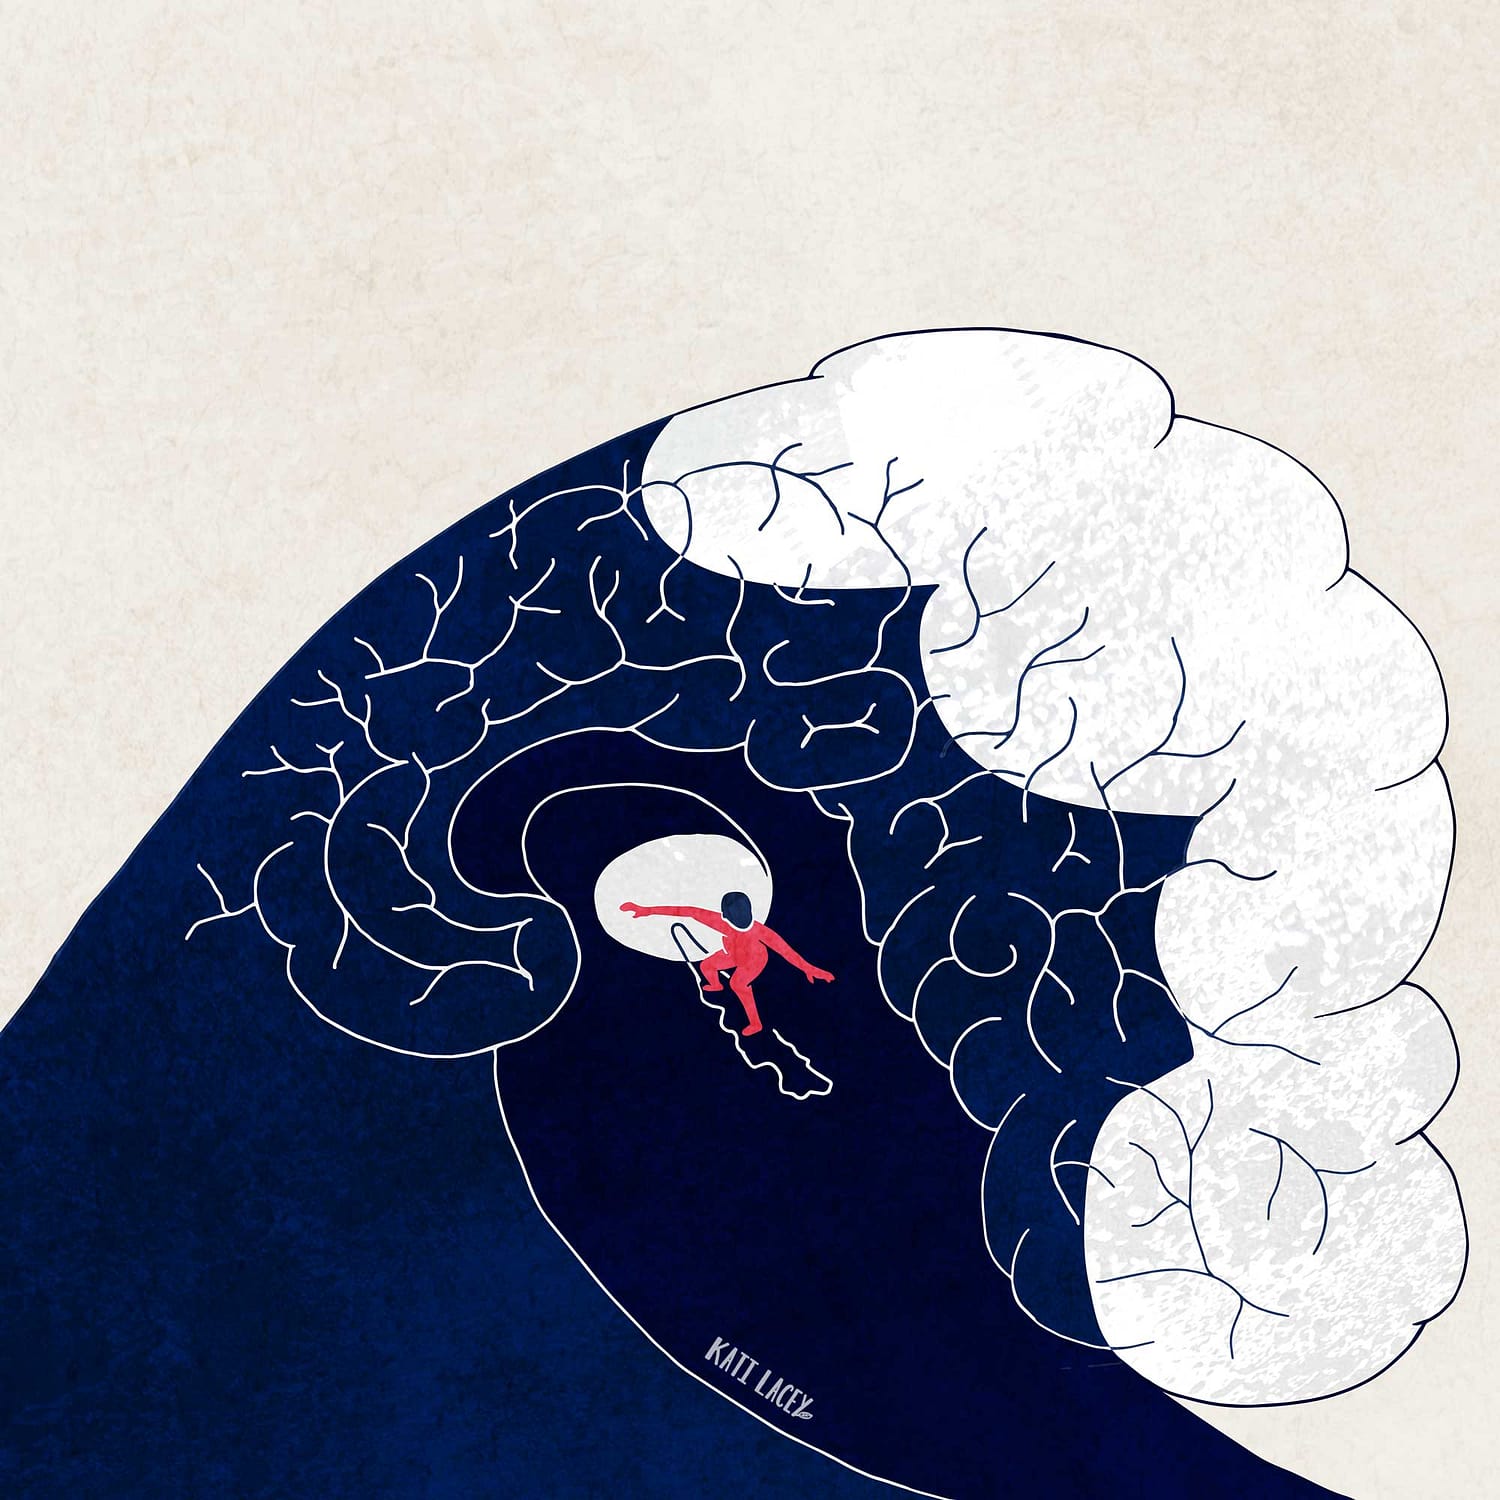 kati-lacey-editorial-illustration-riding the waves of emotions-surfer-brain-tunnel surfing-confidence